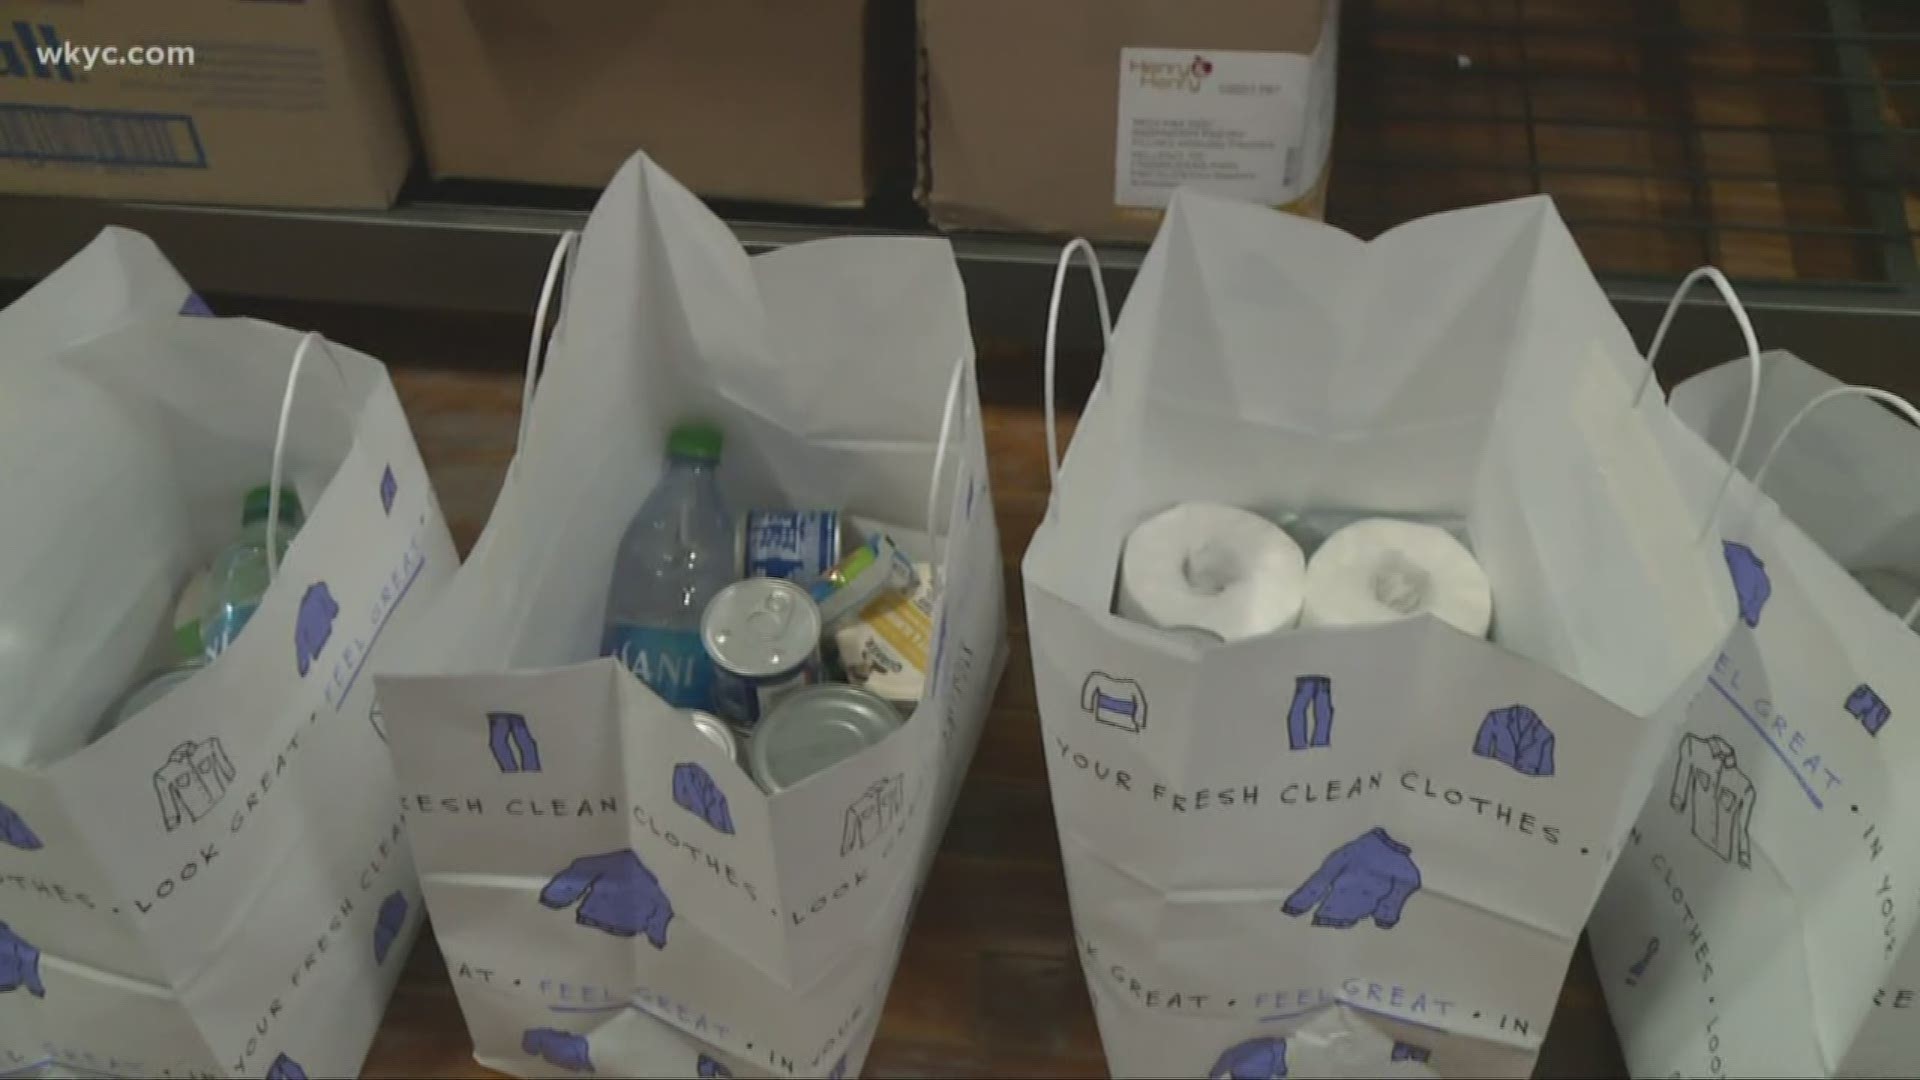 Volunteers for The Wash House and Cafe will deliver care packages, filled with food and toilet paper, to seniors and those in need living within a six-mile radius.